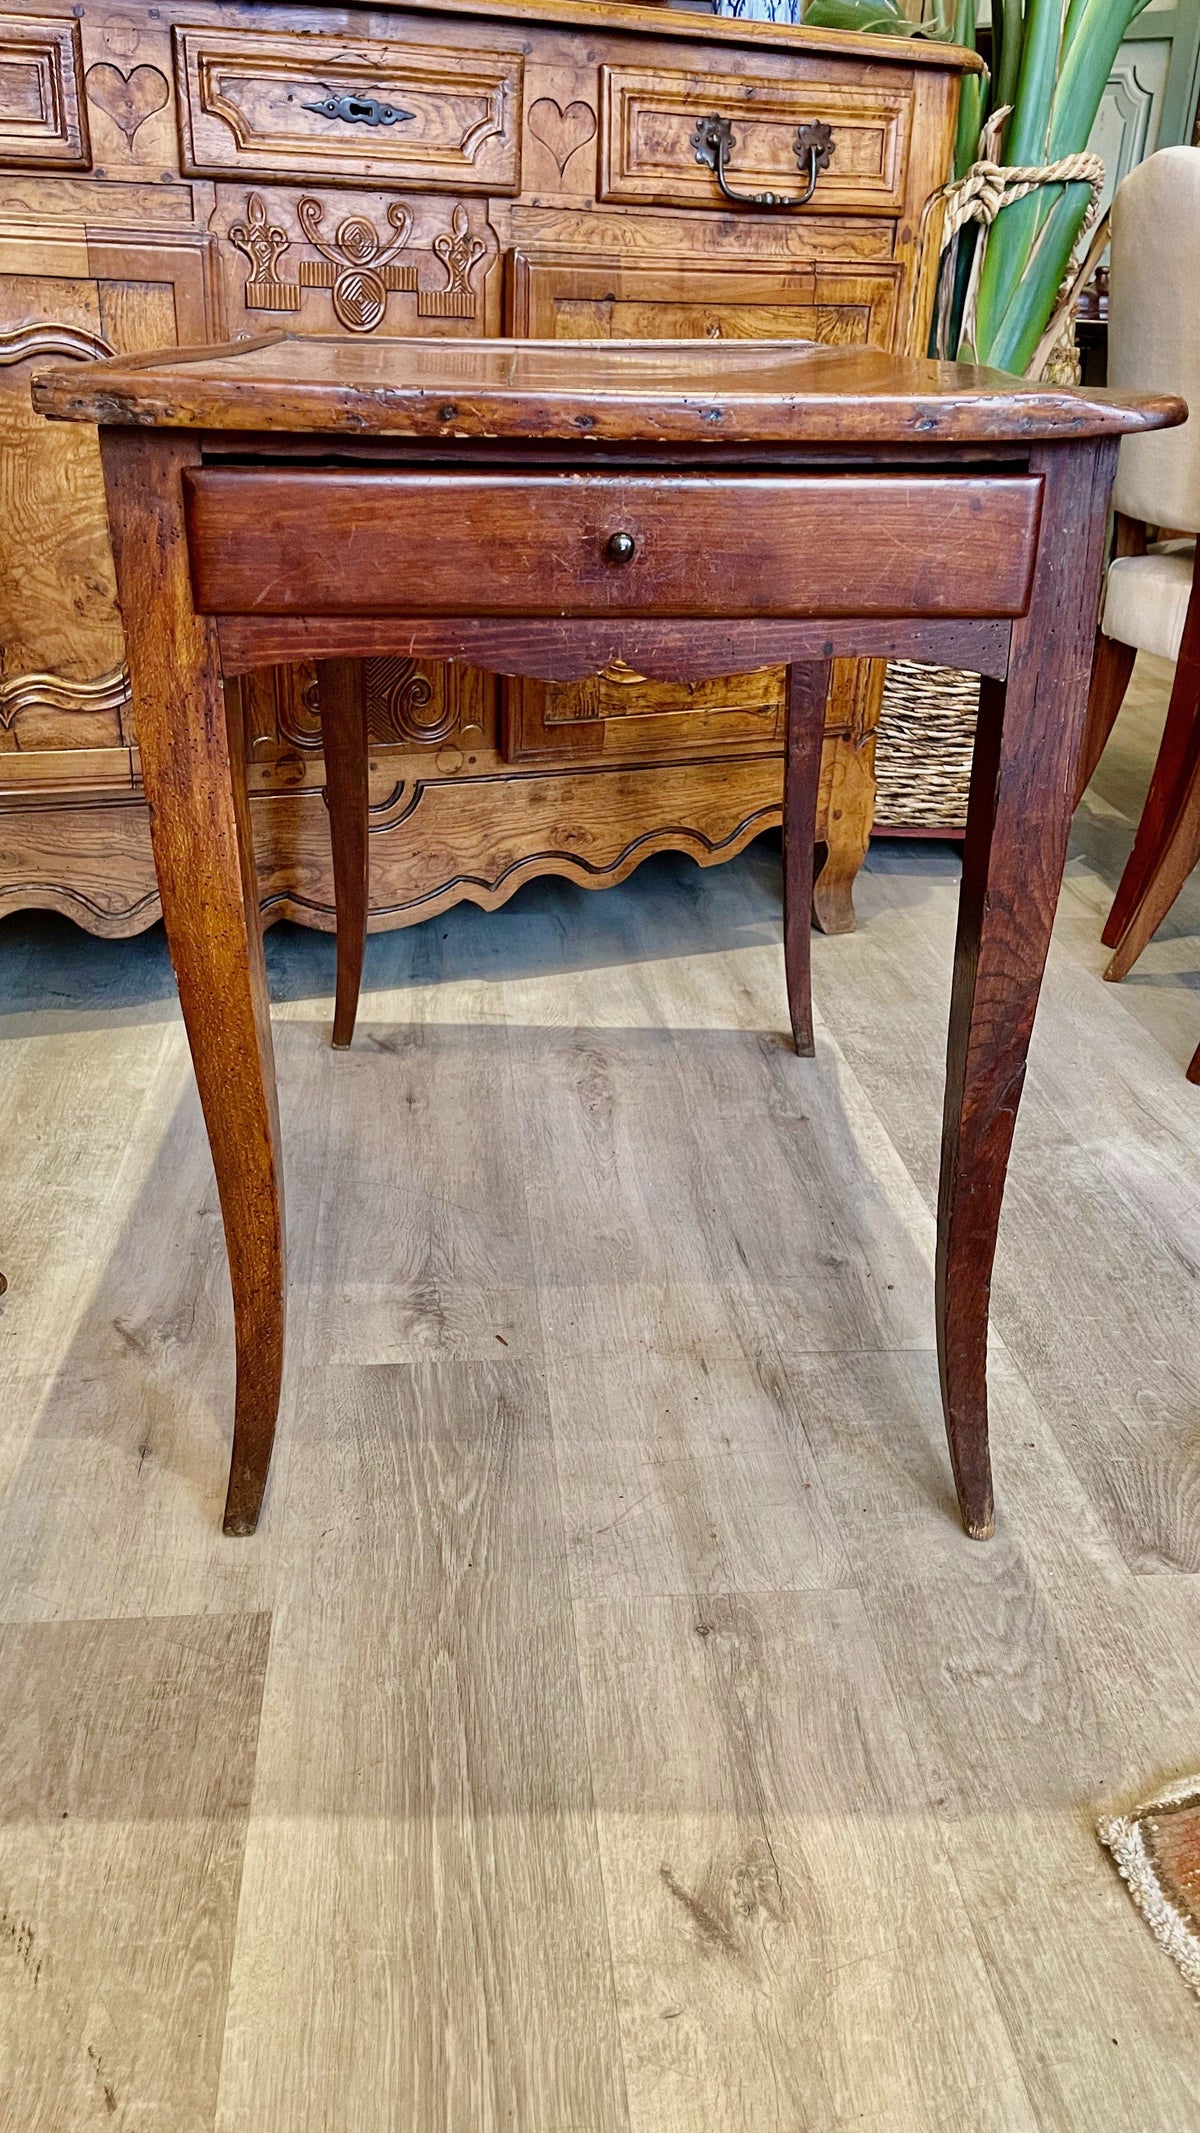 Side Table - 18TH CENTURY FRENCH PROVINCIAL Walnut ESCRITOIRE SIDE TABLE